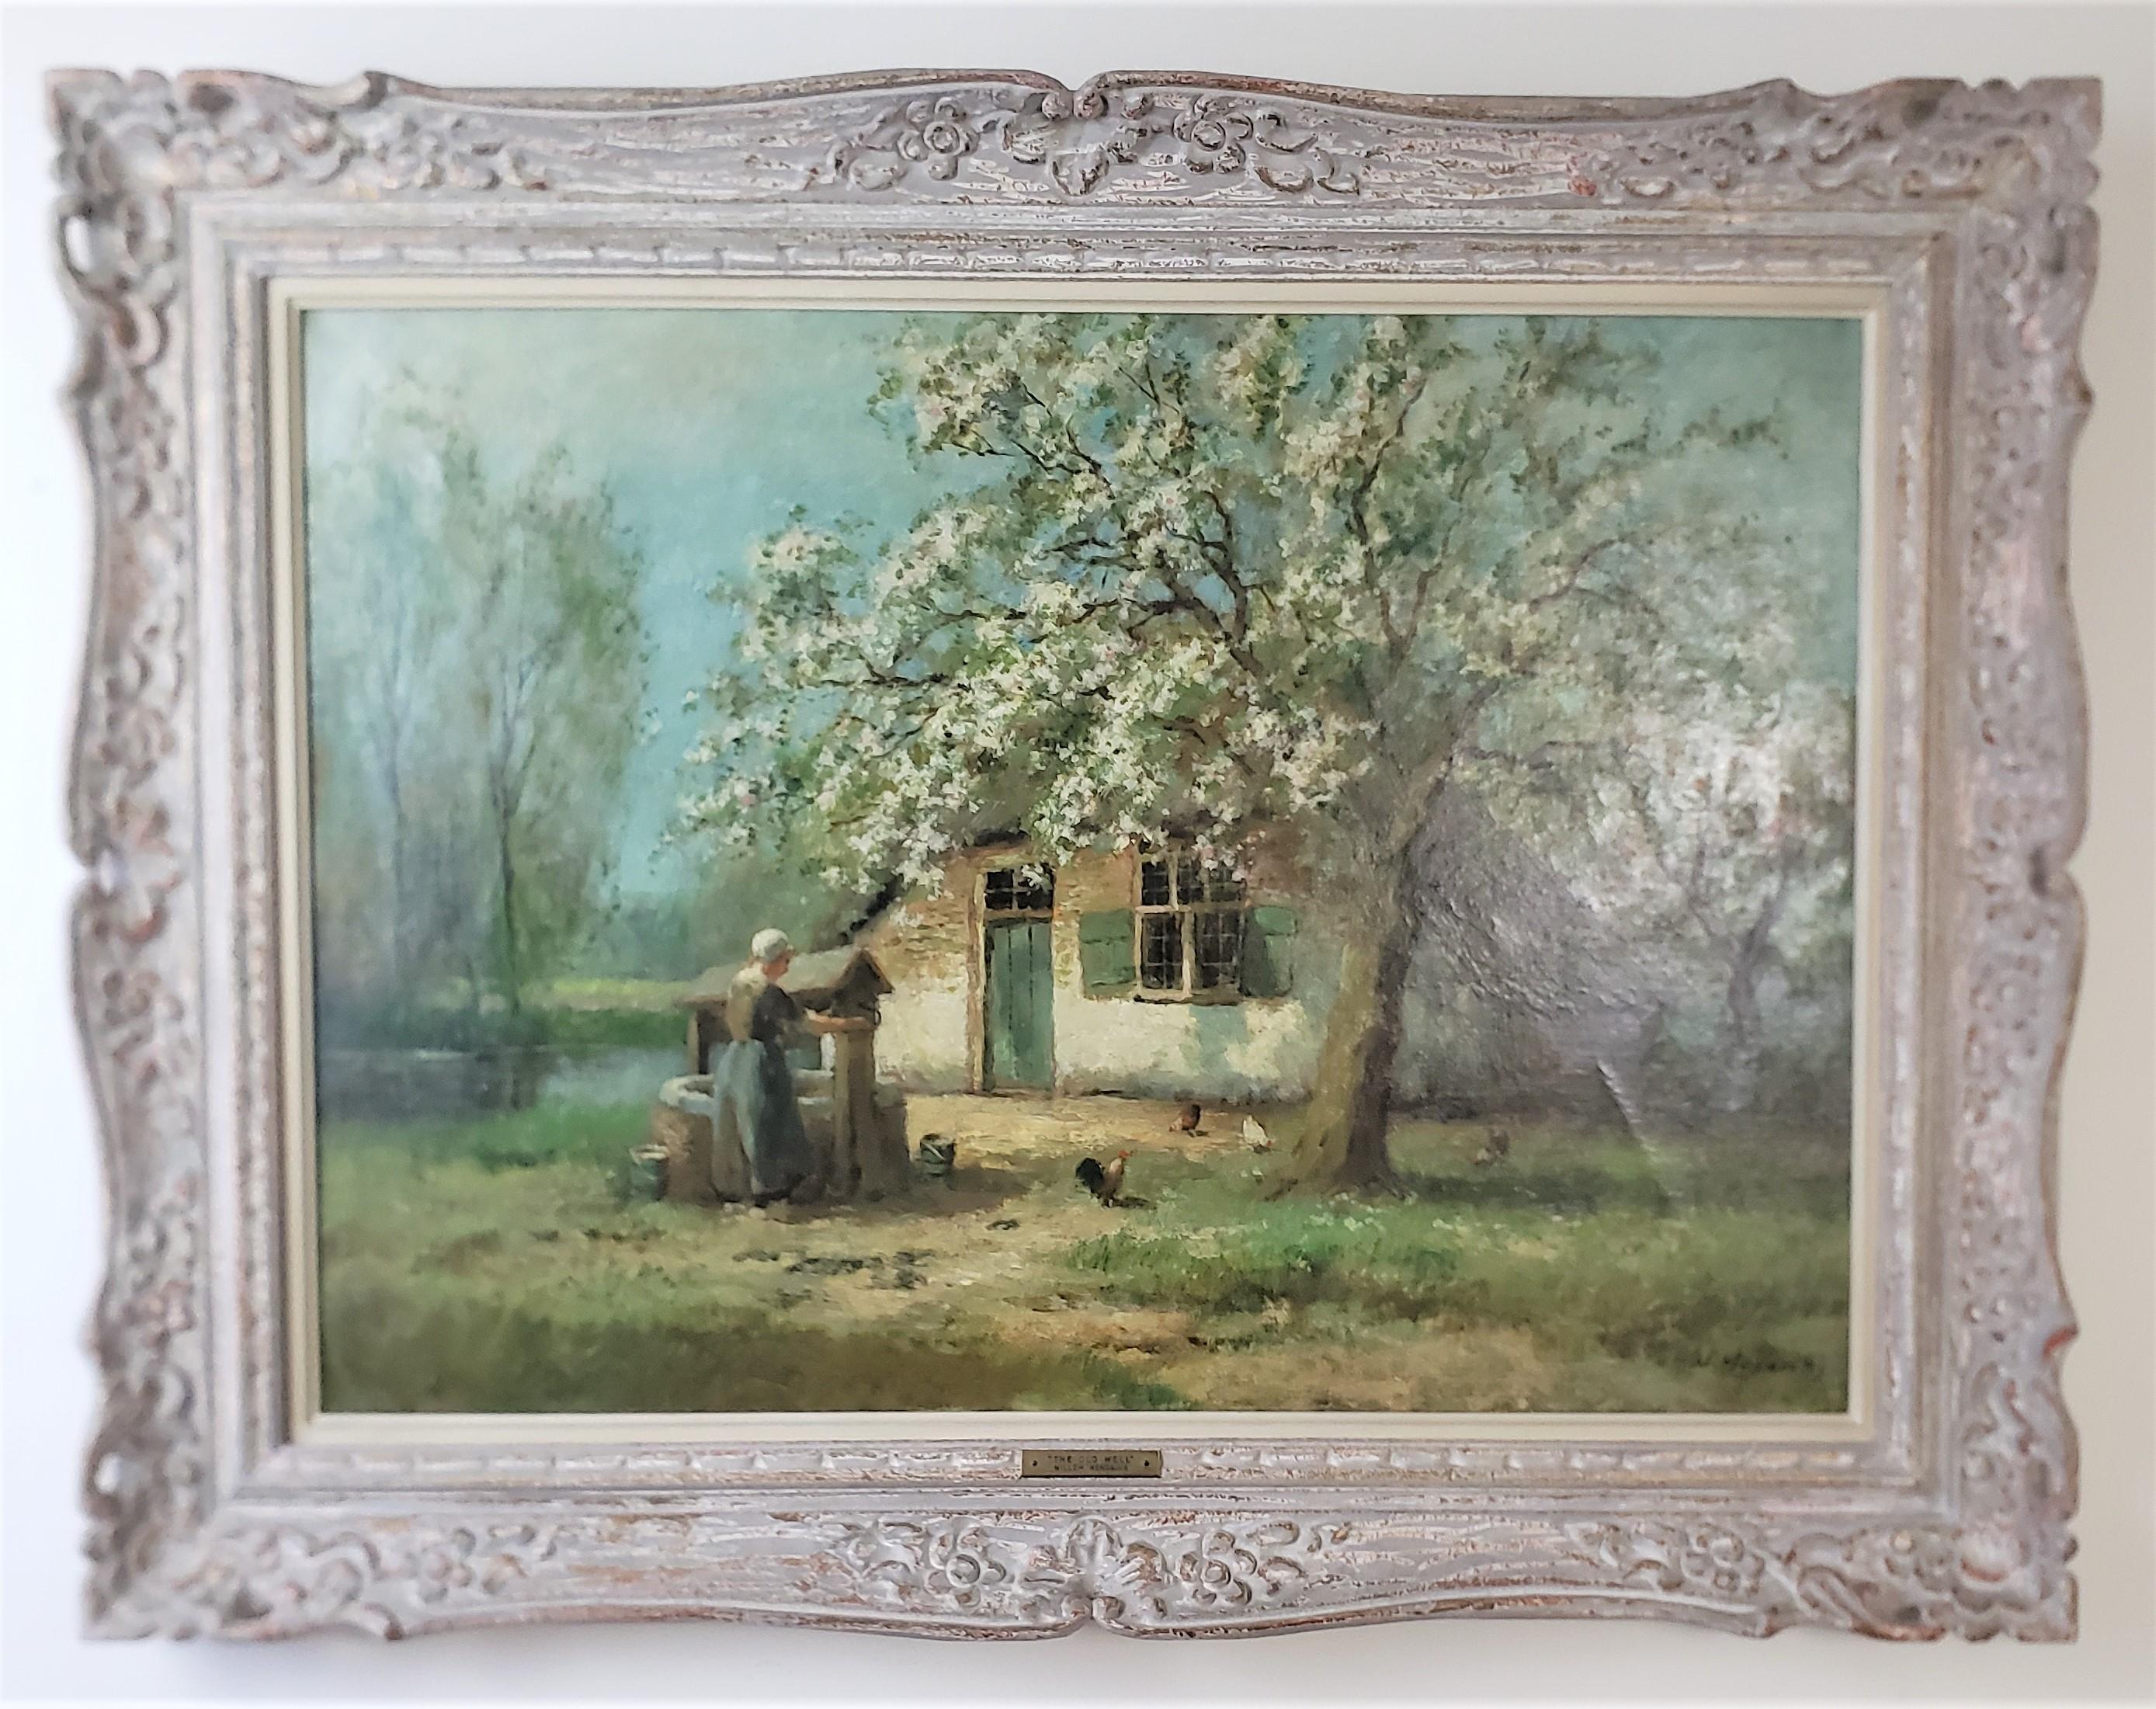 This large antique oil painting was done by the well known Willem Hendriks of the Netherlands in approximately 1920 in his signature realistic style. The painting is an oil on canvas and is titled 